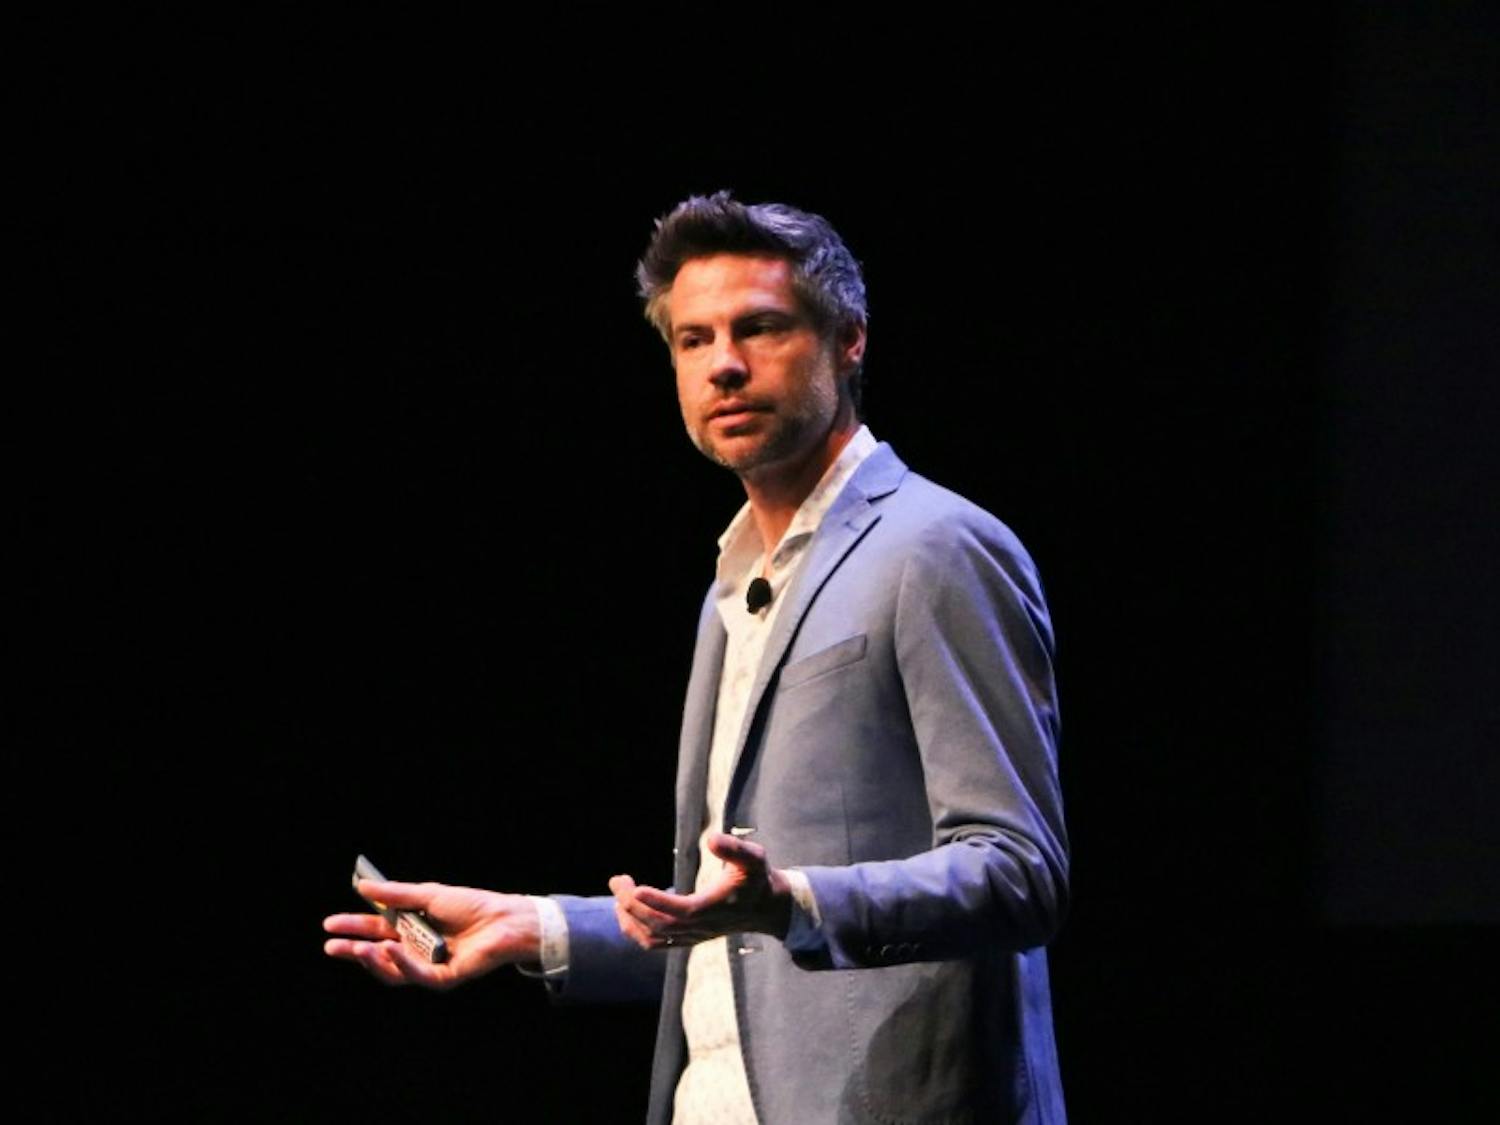 Pro-nuclear environmentalist Michael Shellenberger promoted nuclear energy in his Distinguished Lecture Series talk Tuesday.